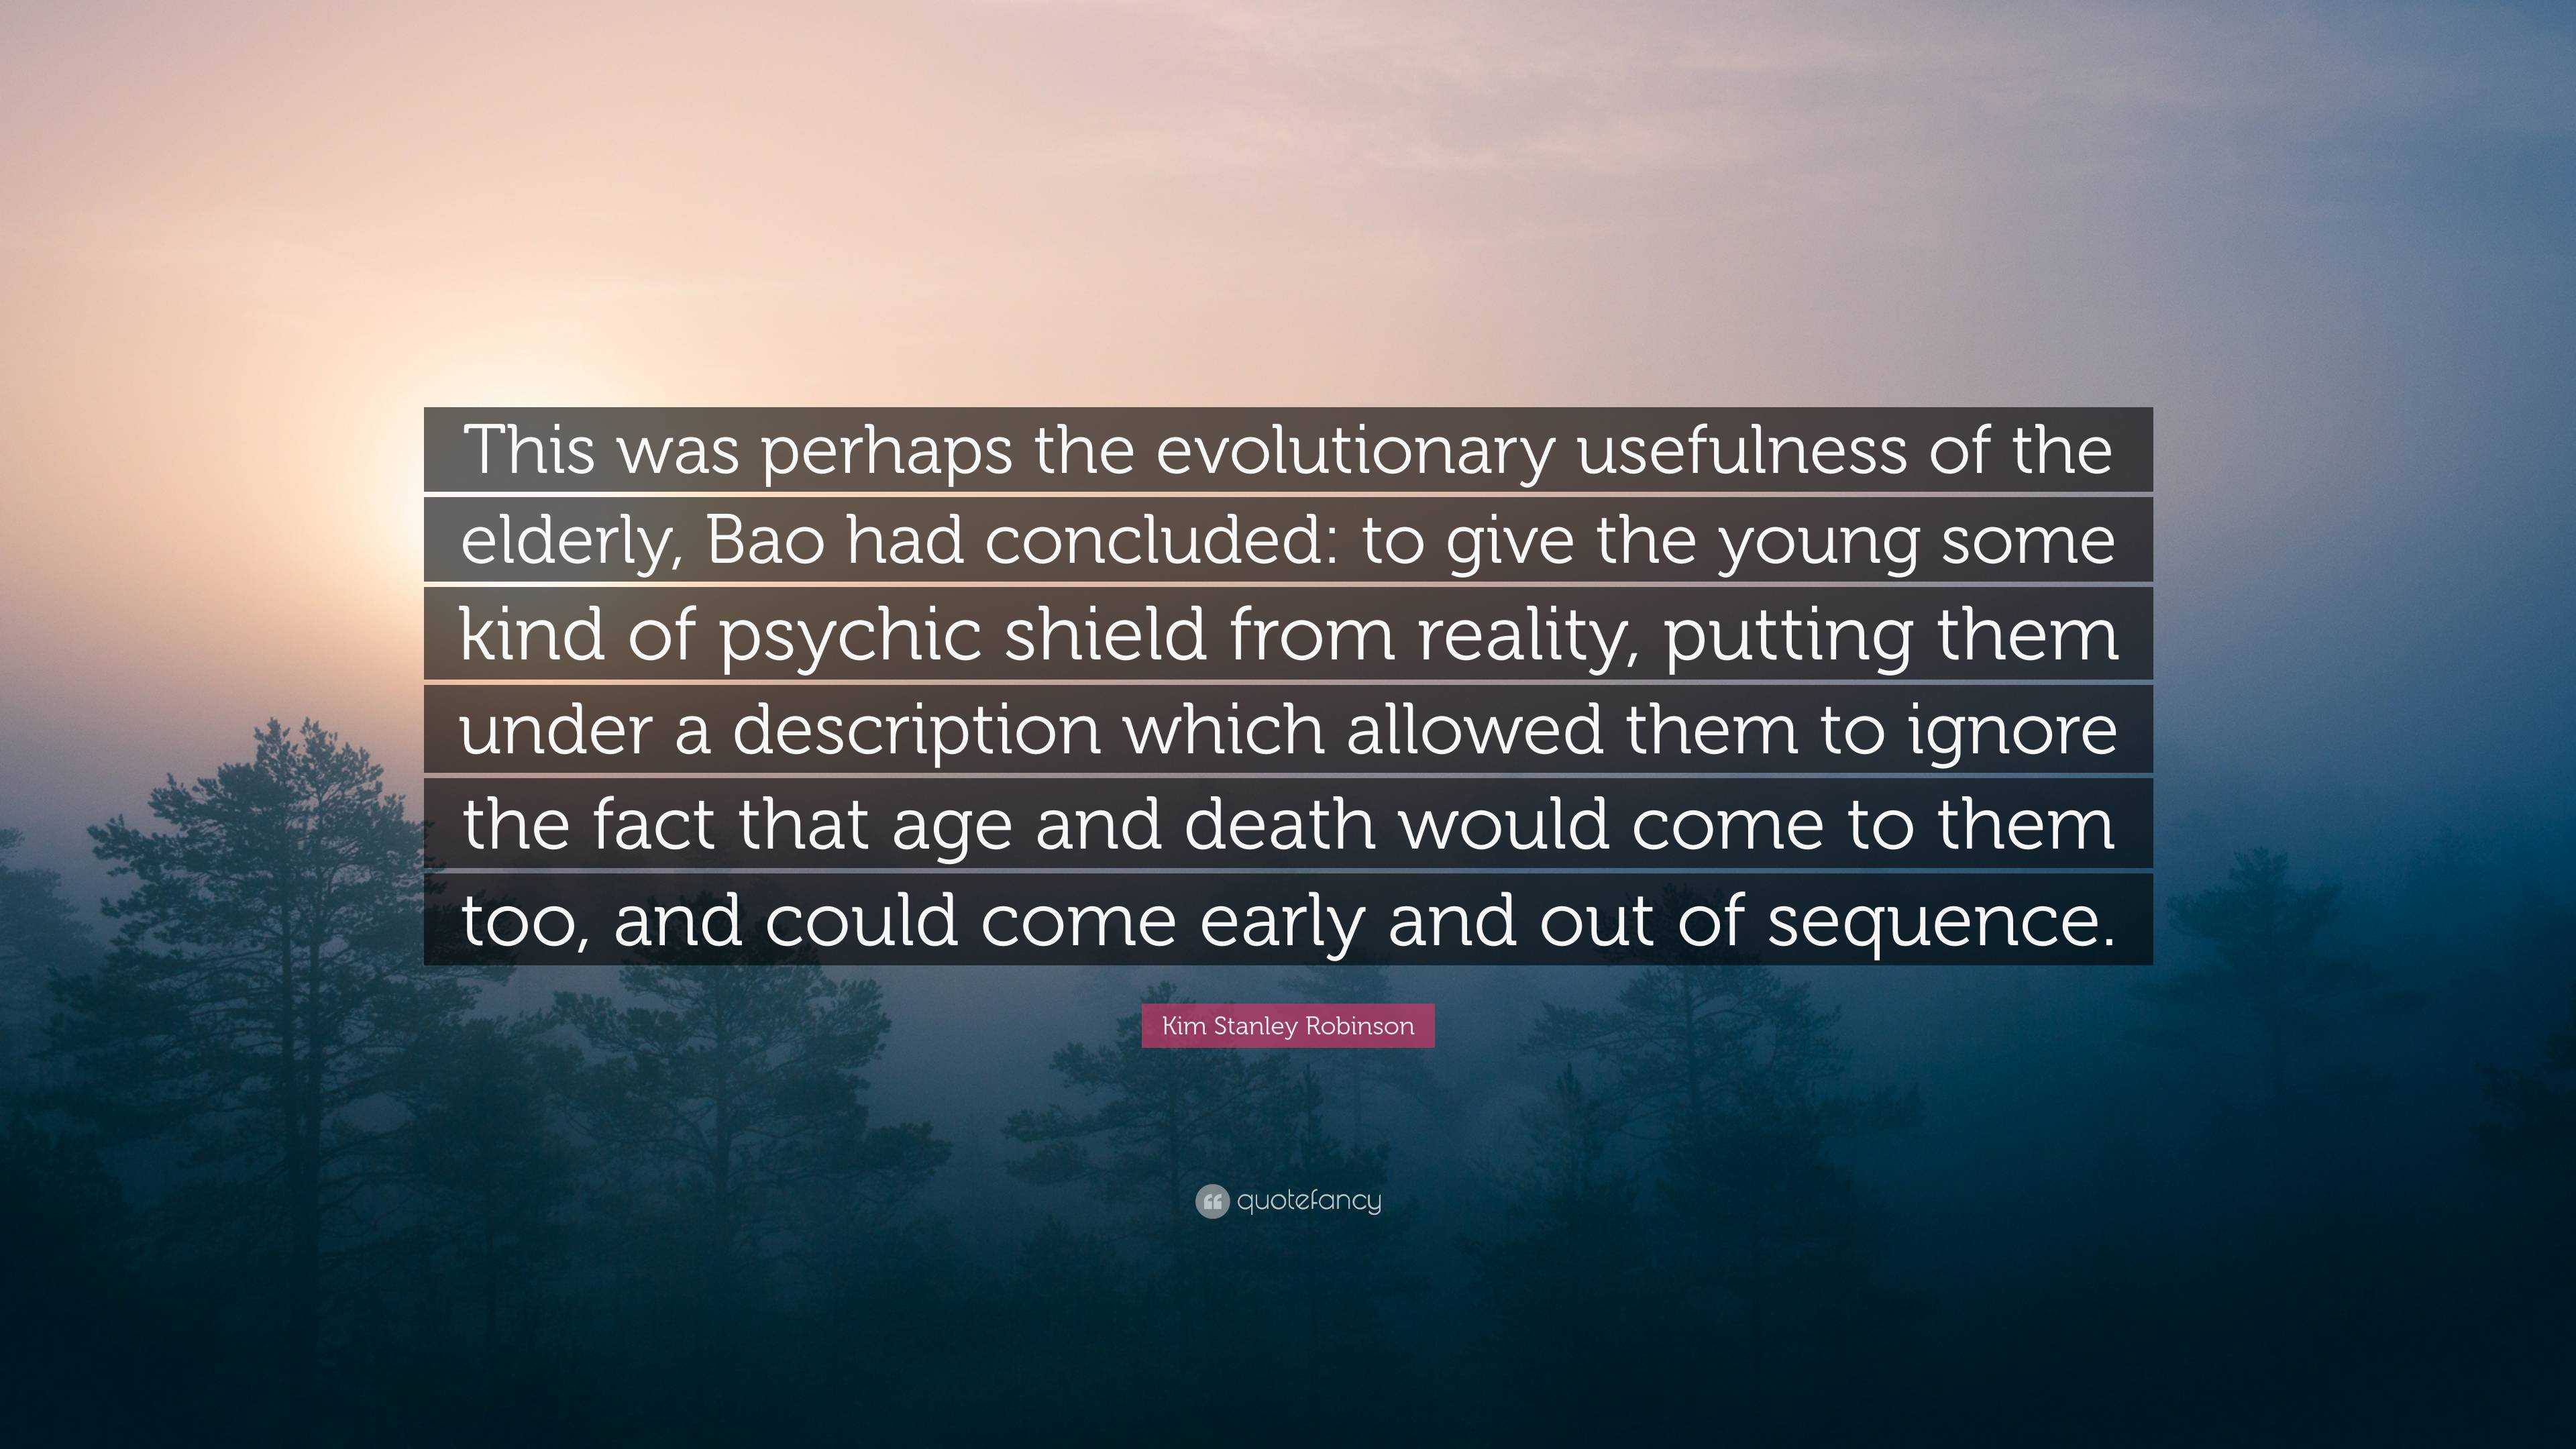 https://quotefancy.com/media/wallpaper/3840x2160/6692572-Kim-Stanley-Robinson-Quote-This-was-perhaps-the-evolutionary.jpg